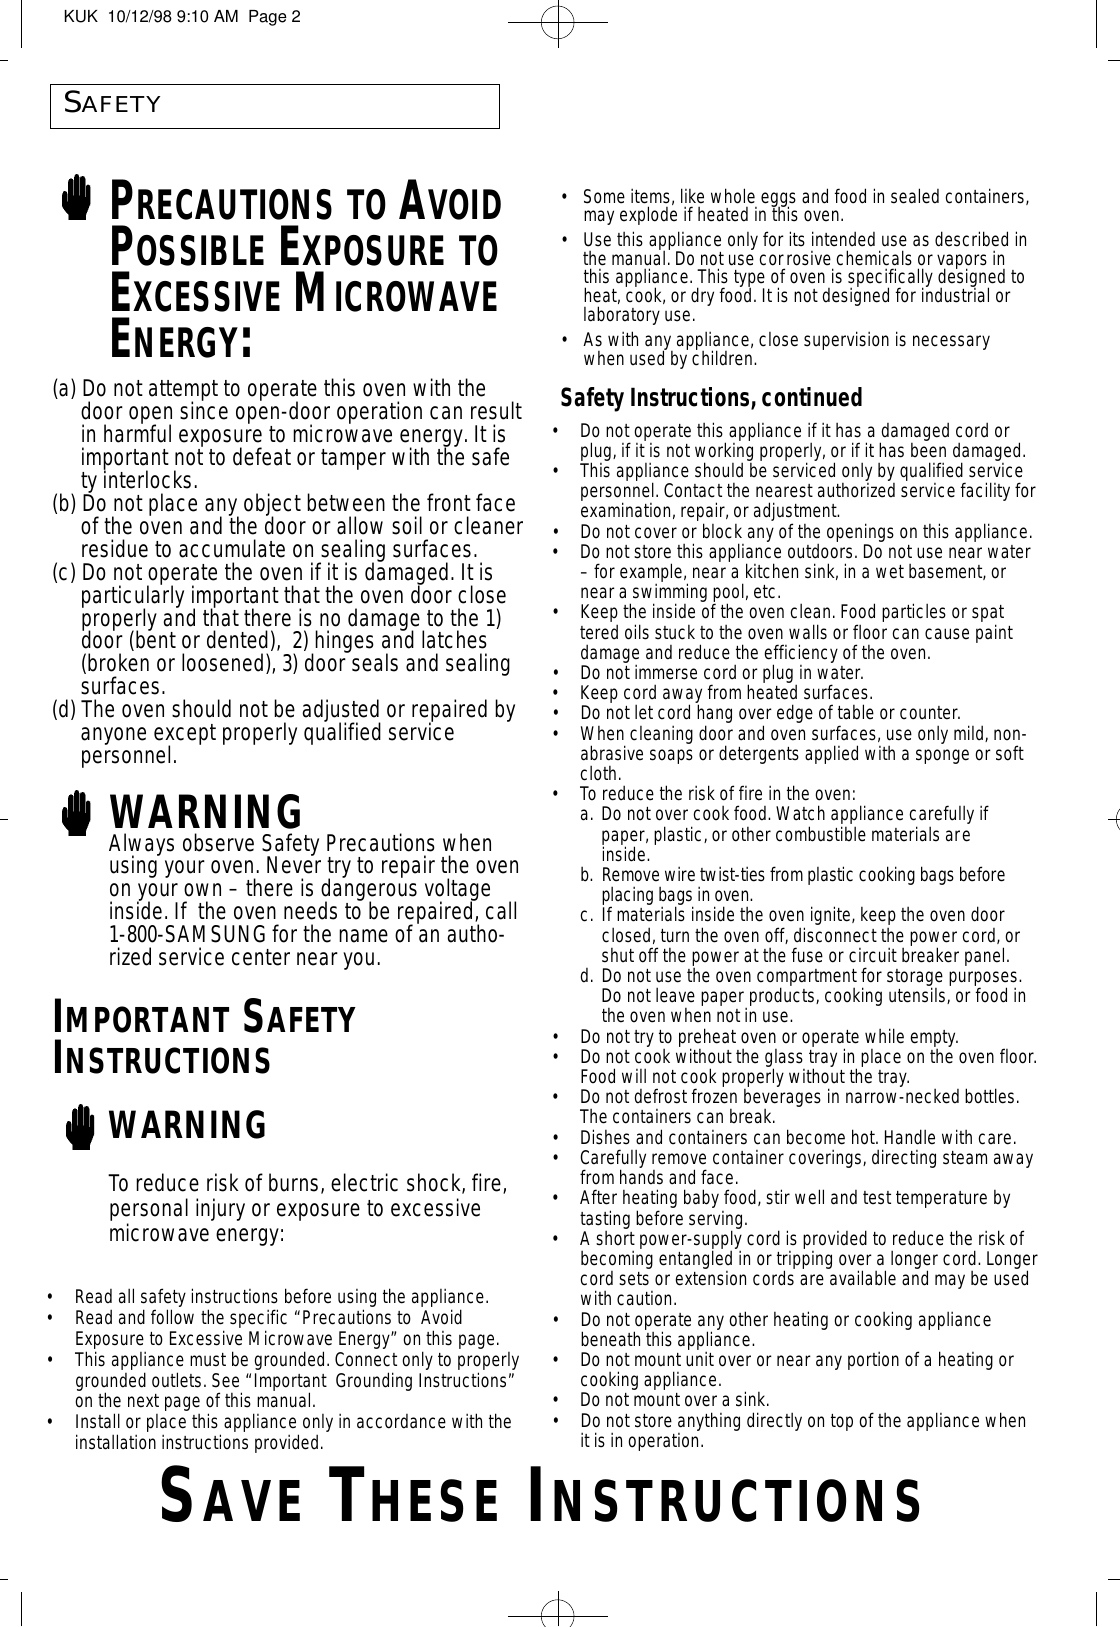 SAFETYPRECAUTIONS TO AVOIDPOSSIBLE EXPOSURE TOEXCESSIVE MICROWAVEENERGY:•Do not operate this appliance if it has a damaged cord or plug, if it is not working properly, or if it has been damaged.•This appliance should be serviced only by qualified service personnel. Contact the nearest authorized service facility forexamination, repair, or adjustment.•Do not cover or block any of the openings on this appliance.•Do not store this appliance outdoors. Do not use near water – for example, near a kitchen sink, in a wet basement, or near a swimming pool, etc. •Keep the inside of the oven clean. Food particles or spattered oils stuck to the oven walls or floor can cause paint damage and reduce the efficiency of the oven.•Do not immerse cord or plug in water.•Keep cord away from heated surfaces.•Do not let cord hang over edge of table or counter.•When cleaning door and oven surfaces, use only mild, non-abrasive soaps or detergents applied with a sponge or soft cloth.• To reduce the risk of fire in the oven:a. Do not over cook food. Watch appliance carefully if paper, plastic, or other combustible materials areinside.b . Remove wire twist-ties from plastic cooking bags before placing bags in oven.c. If materials inside the oven ignite, keep the oven door closed, turn the oven off, disconnect the power cord, or shut off the power at the fuse or circuit breaker panel.d. Do not use the oven compartment for storage purposes. Do not leave paper products, cooking utensils, or food in the oven when not in use.•Do not try to preheat oven or operate while empty.•Do not cook without the glass tray in place on the oven floor.Food will not cook properly without the tray.•Do not defrost frozen beverages in narrow-necked bottles. The containers can break.•Dishes and containers can become hot. Handle with care.•Carefully remove container coverings, directing steam awayfrom hands and face.•After heating baby food, stir well and test temperature by tasting before serving.•A short power-supply cord is provided to reduce the risk of becoming entangled in or tripping over a longer cord. Longercord sets or extension cords are available and may be used with caution.  •Do not operate any other heating or cooking appliance beneath this appliance.•Do not mount unit over or near any portion of a heating or cooking appliance.• Do not mount over a sink.•Do not store anything directly on top of the appliance when it is in operation.(a) Do not attempt to operate this oven with the door open since open-door operation can resultin harmful exposure to microwave energy. It is important not to defeat or tamper with the safety interlocks.(b) Do not place any object between the front face of the oven and the door or allow soil or cleanerresidue to accumulate on sealing surfaces.(c) Do not operate the oven if it is damaged. It is particularly important that the oven door close properly and that there is no damage to the 1) door (bent or dented),  2) hinges and latches (broken or loosened), 3) door seals and sealing surfaces.(d) The oven should not be adjusted or repaired by anyone except properly qualified service personnel.WARNINGAlways observe Safety Precautions whenusing your oven. Never try to repair the ovenon your own – there is dangerous voltageinside. If  the oven needs to be repaired, call1-800-SAMSUNG for the name of an autho-rized service center near you.IMPORTANT SAFETYINSTRUCTIONSWARNING•Some items, like whole eggs and food in sealed containers,may explode if heated in this oven.•Use this appliance only for its intended use as described inthe manual. Do not use corrosive chemicals or vapors inthis appliance. This type of oven is specifically designed toheat, cook, or dry food. It is not designed for industrial orlaboratory use.•As with any appliance, close supervision is necessarywhen used by children.Safety Instructions, continuedTo reduce risk of burns, electric shock, fire,personal injury or exposure to excessivemicrowave energy:•Read all safety instructions before using the appliance.•Read and follow the specific “Precautions to  Avoid Exposure to Excessive Microwave Energy” on this page.•This appliance must be grounded. Connect only to properlygrounded outlets. See “Important  Grounding Instructions”on the next page of this manual.  •Install or place this appliance only in accordance with the installation instructions provided.SA V E TH E S E IN S T R U C T I O N SKUK  10/12/98 9:10 AM  Page 2